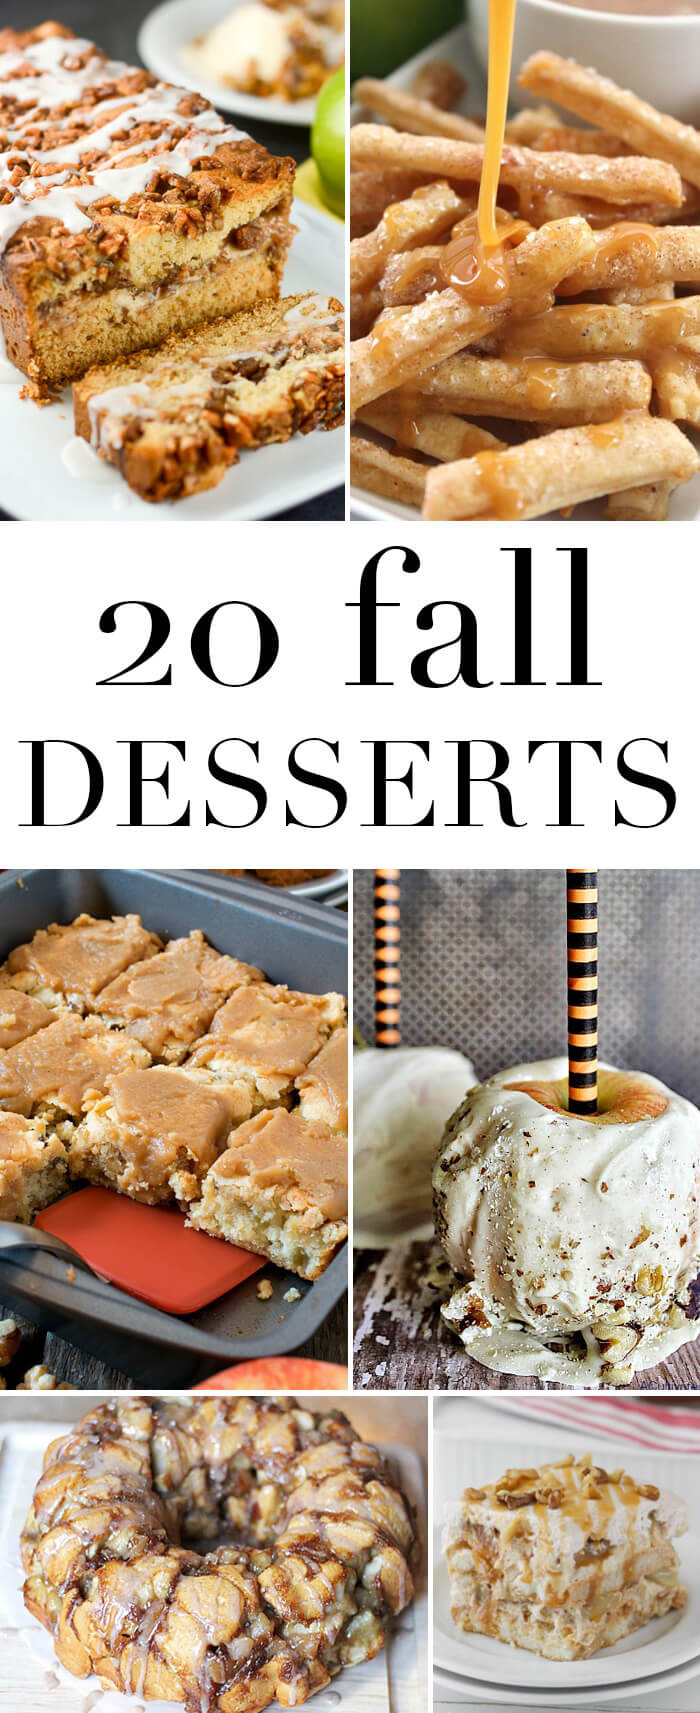 Fall Flavors For Desserts
 20 Fall Dessert Recipes Frugality Gal